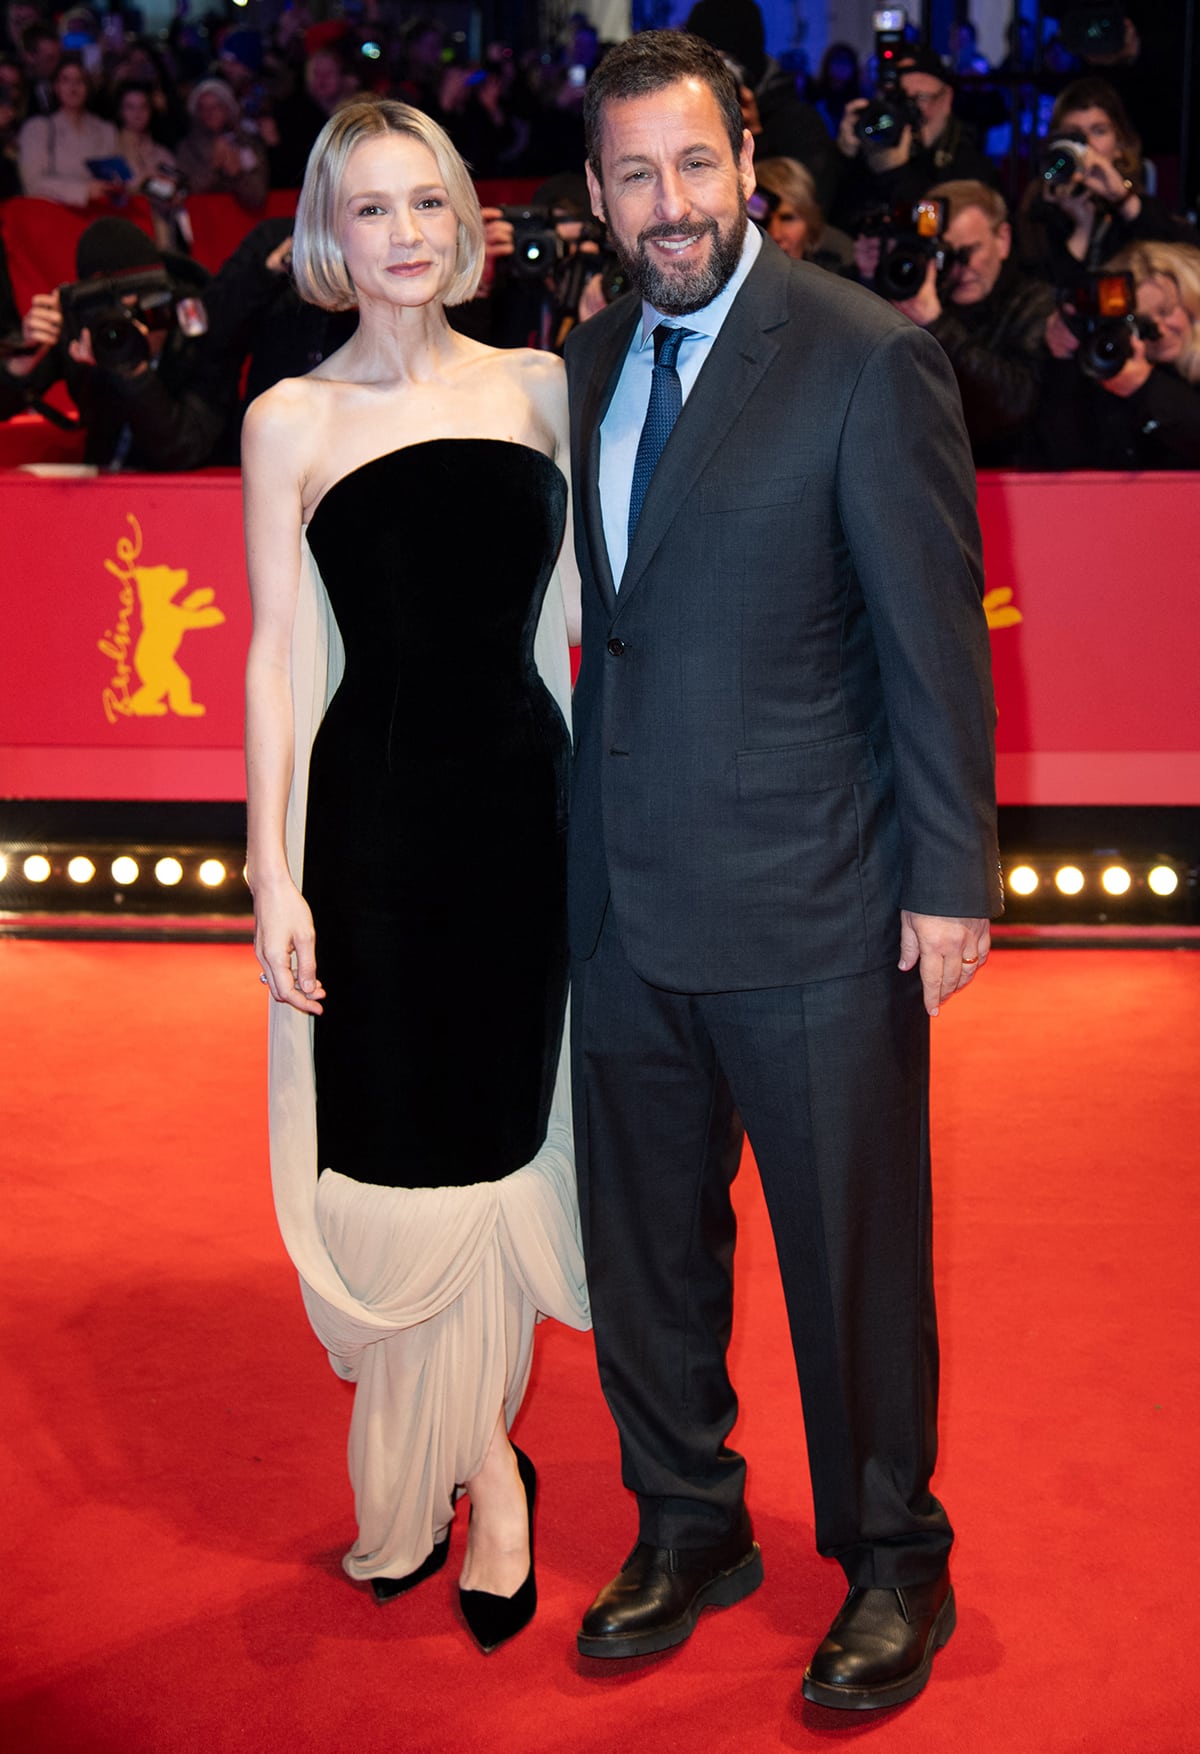 Carey Mulligan looked slightly shorter than Adam Sandler at the Spaceman premiere during the 74th Berlinale International Film Festival Berlin